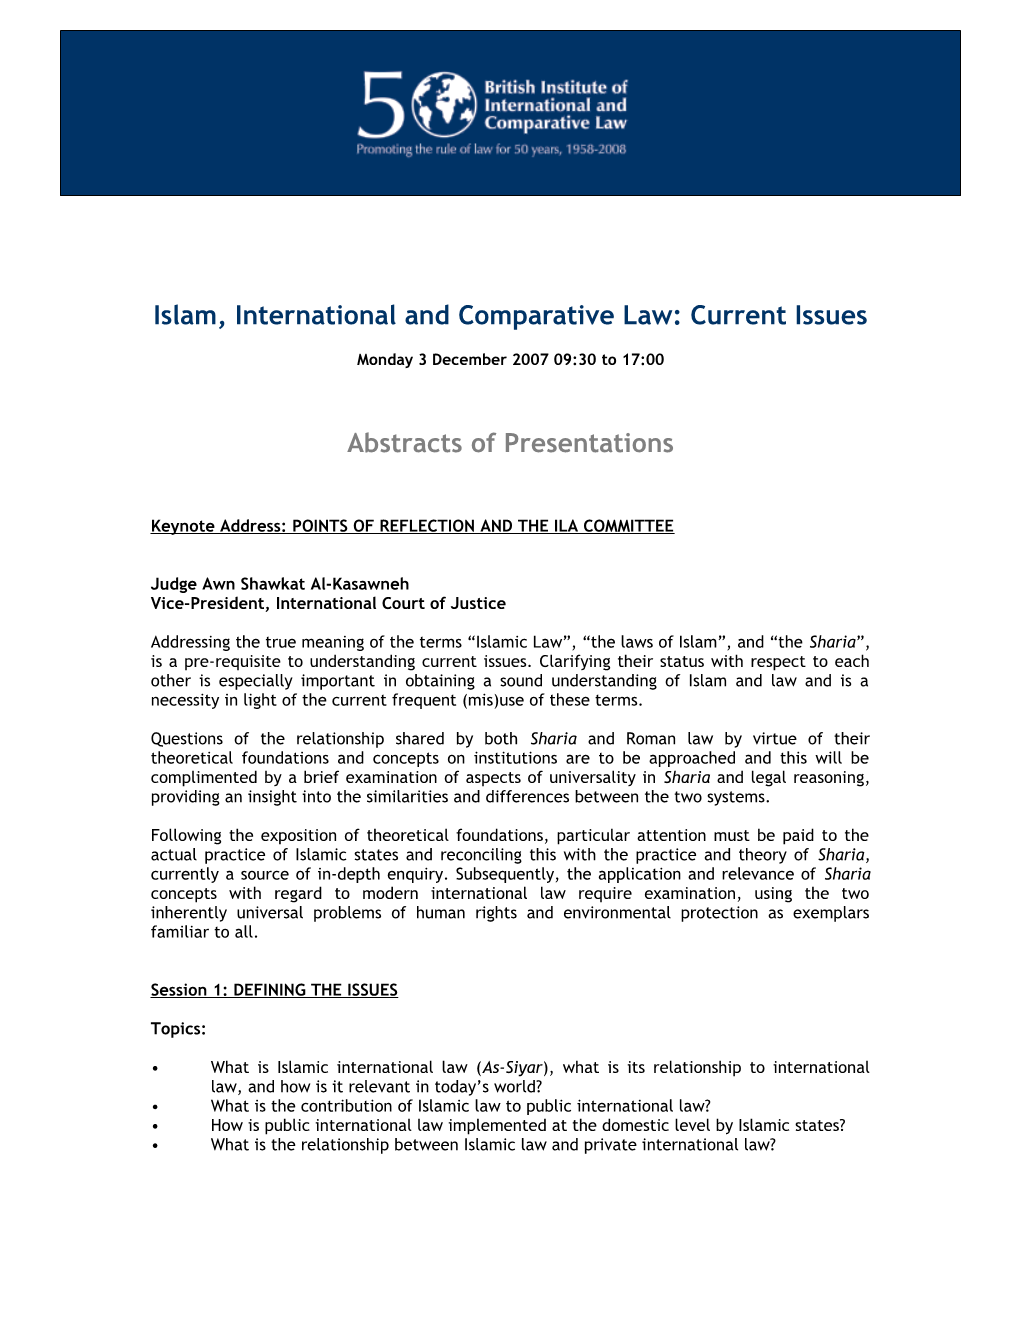 Islam, International and Comparative Law: Current Issues